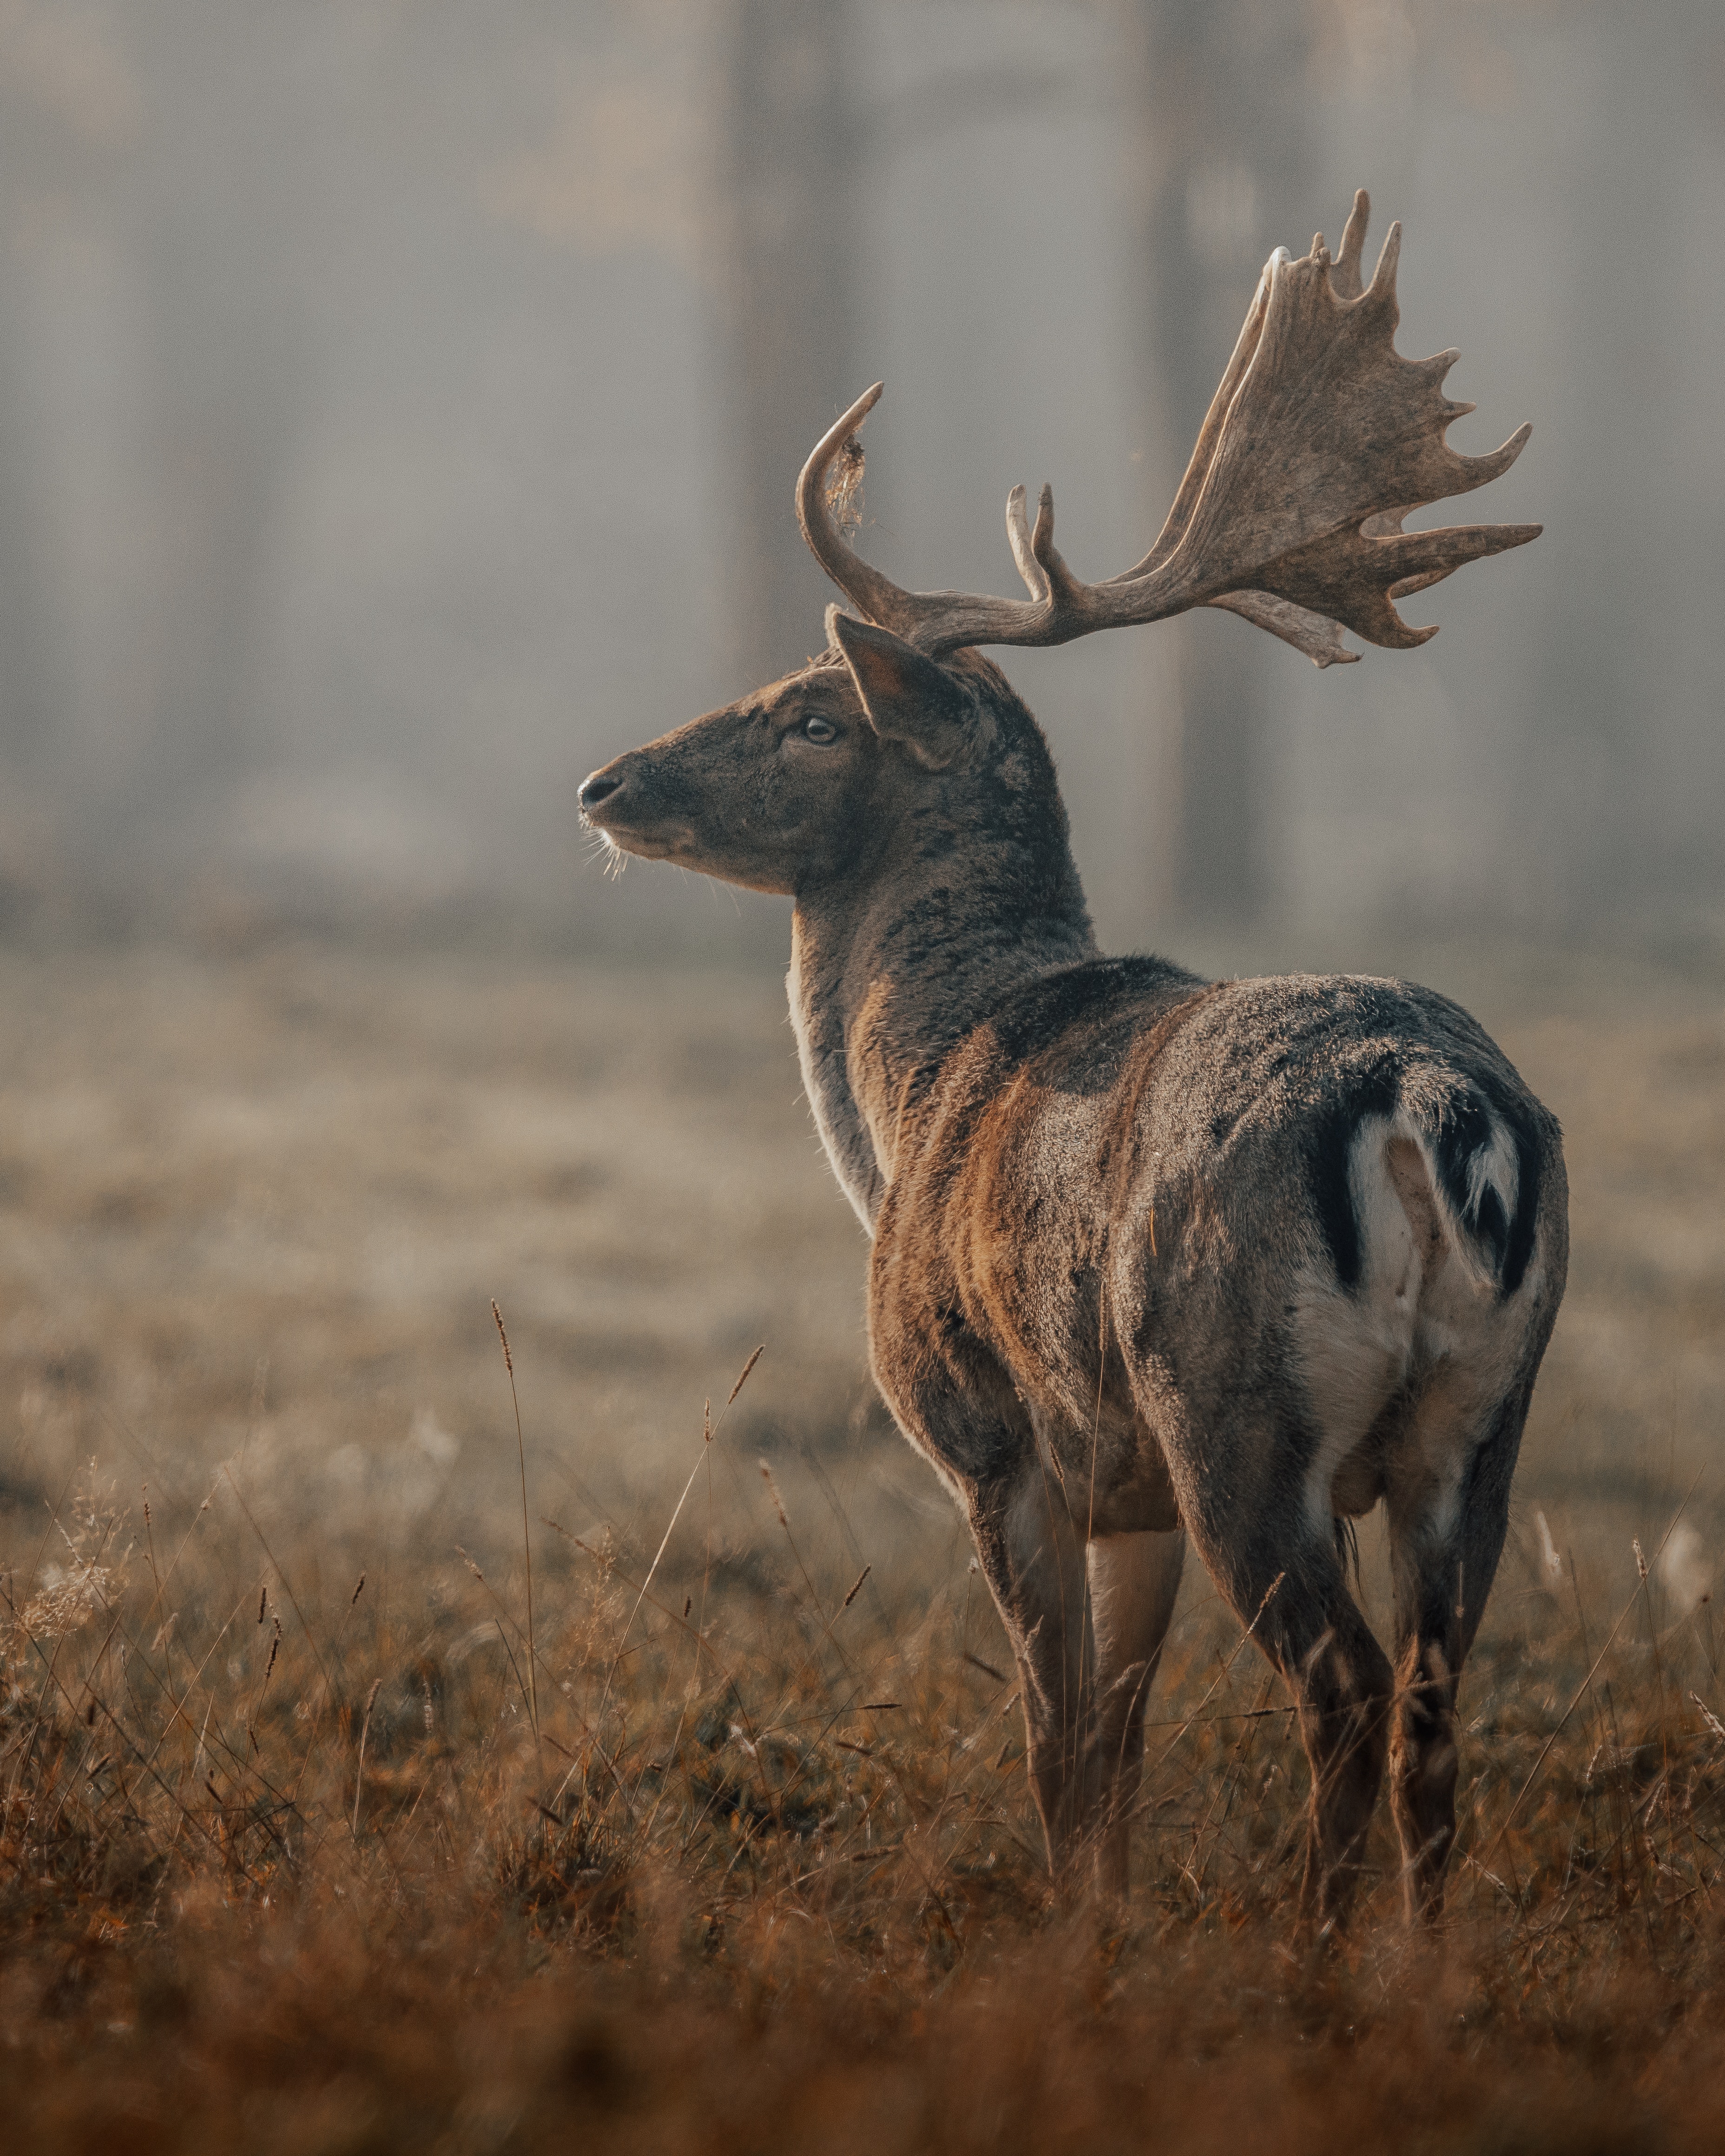 A deer with large antlers stands in a field - Deer